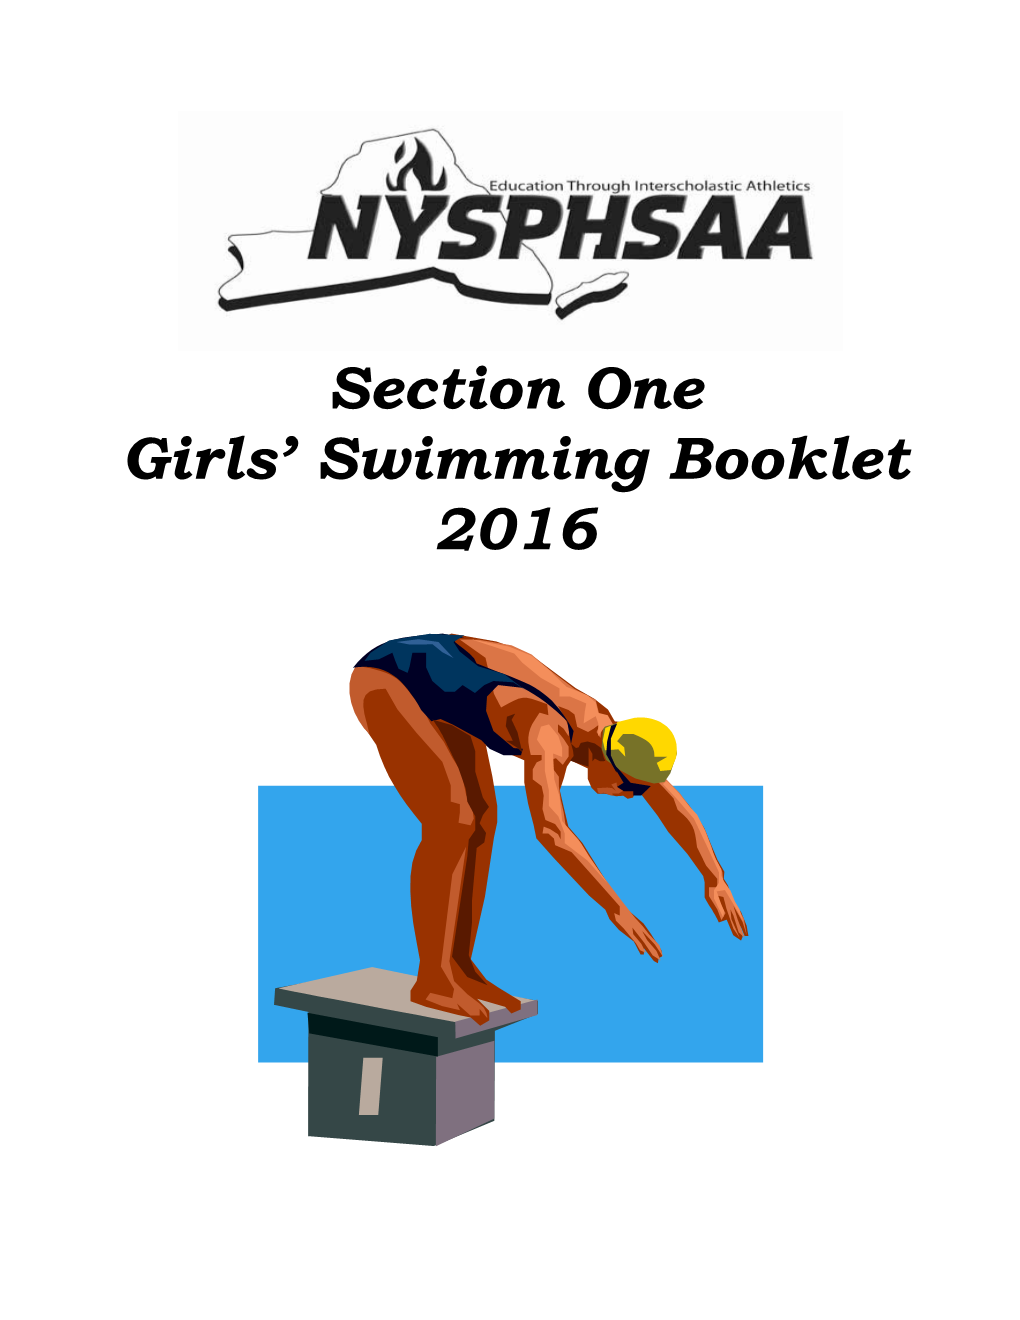 Section One Girls' Swimming Booklet 2016